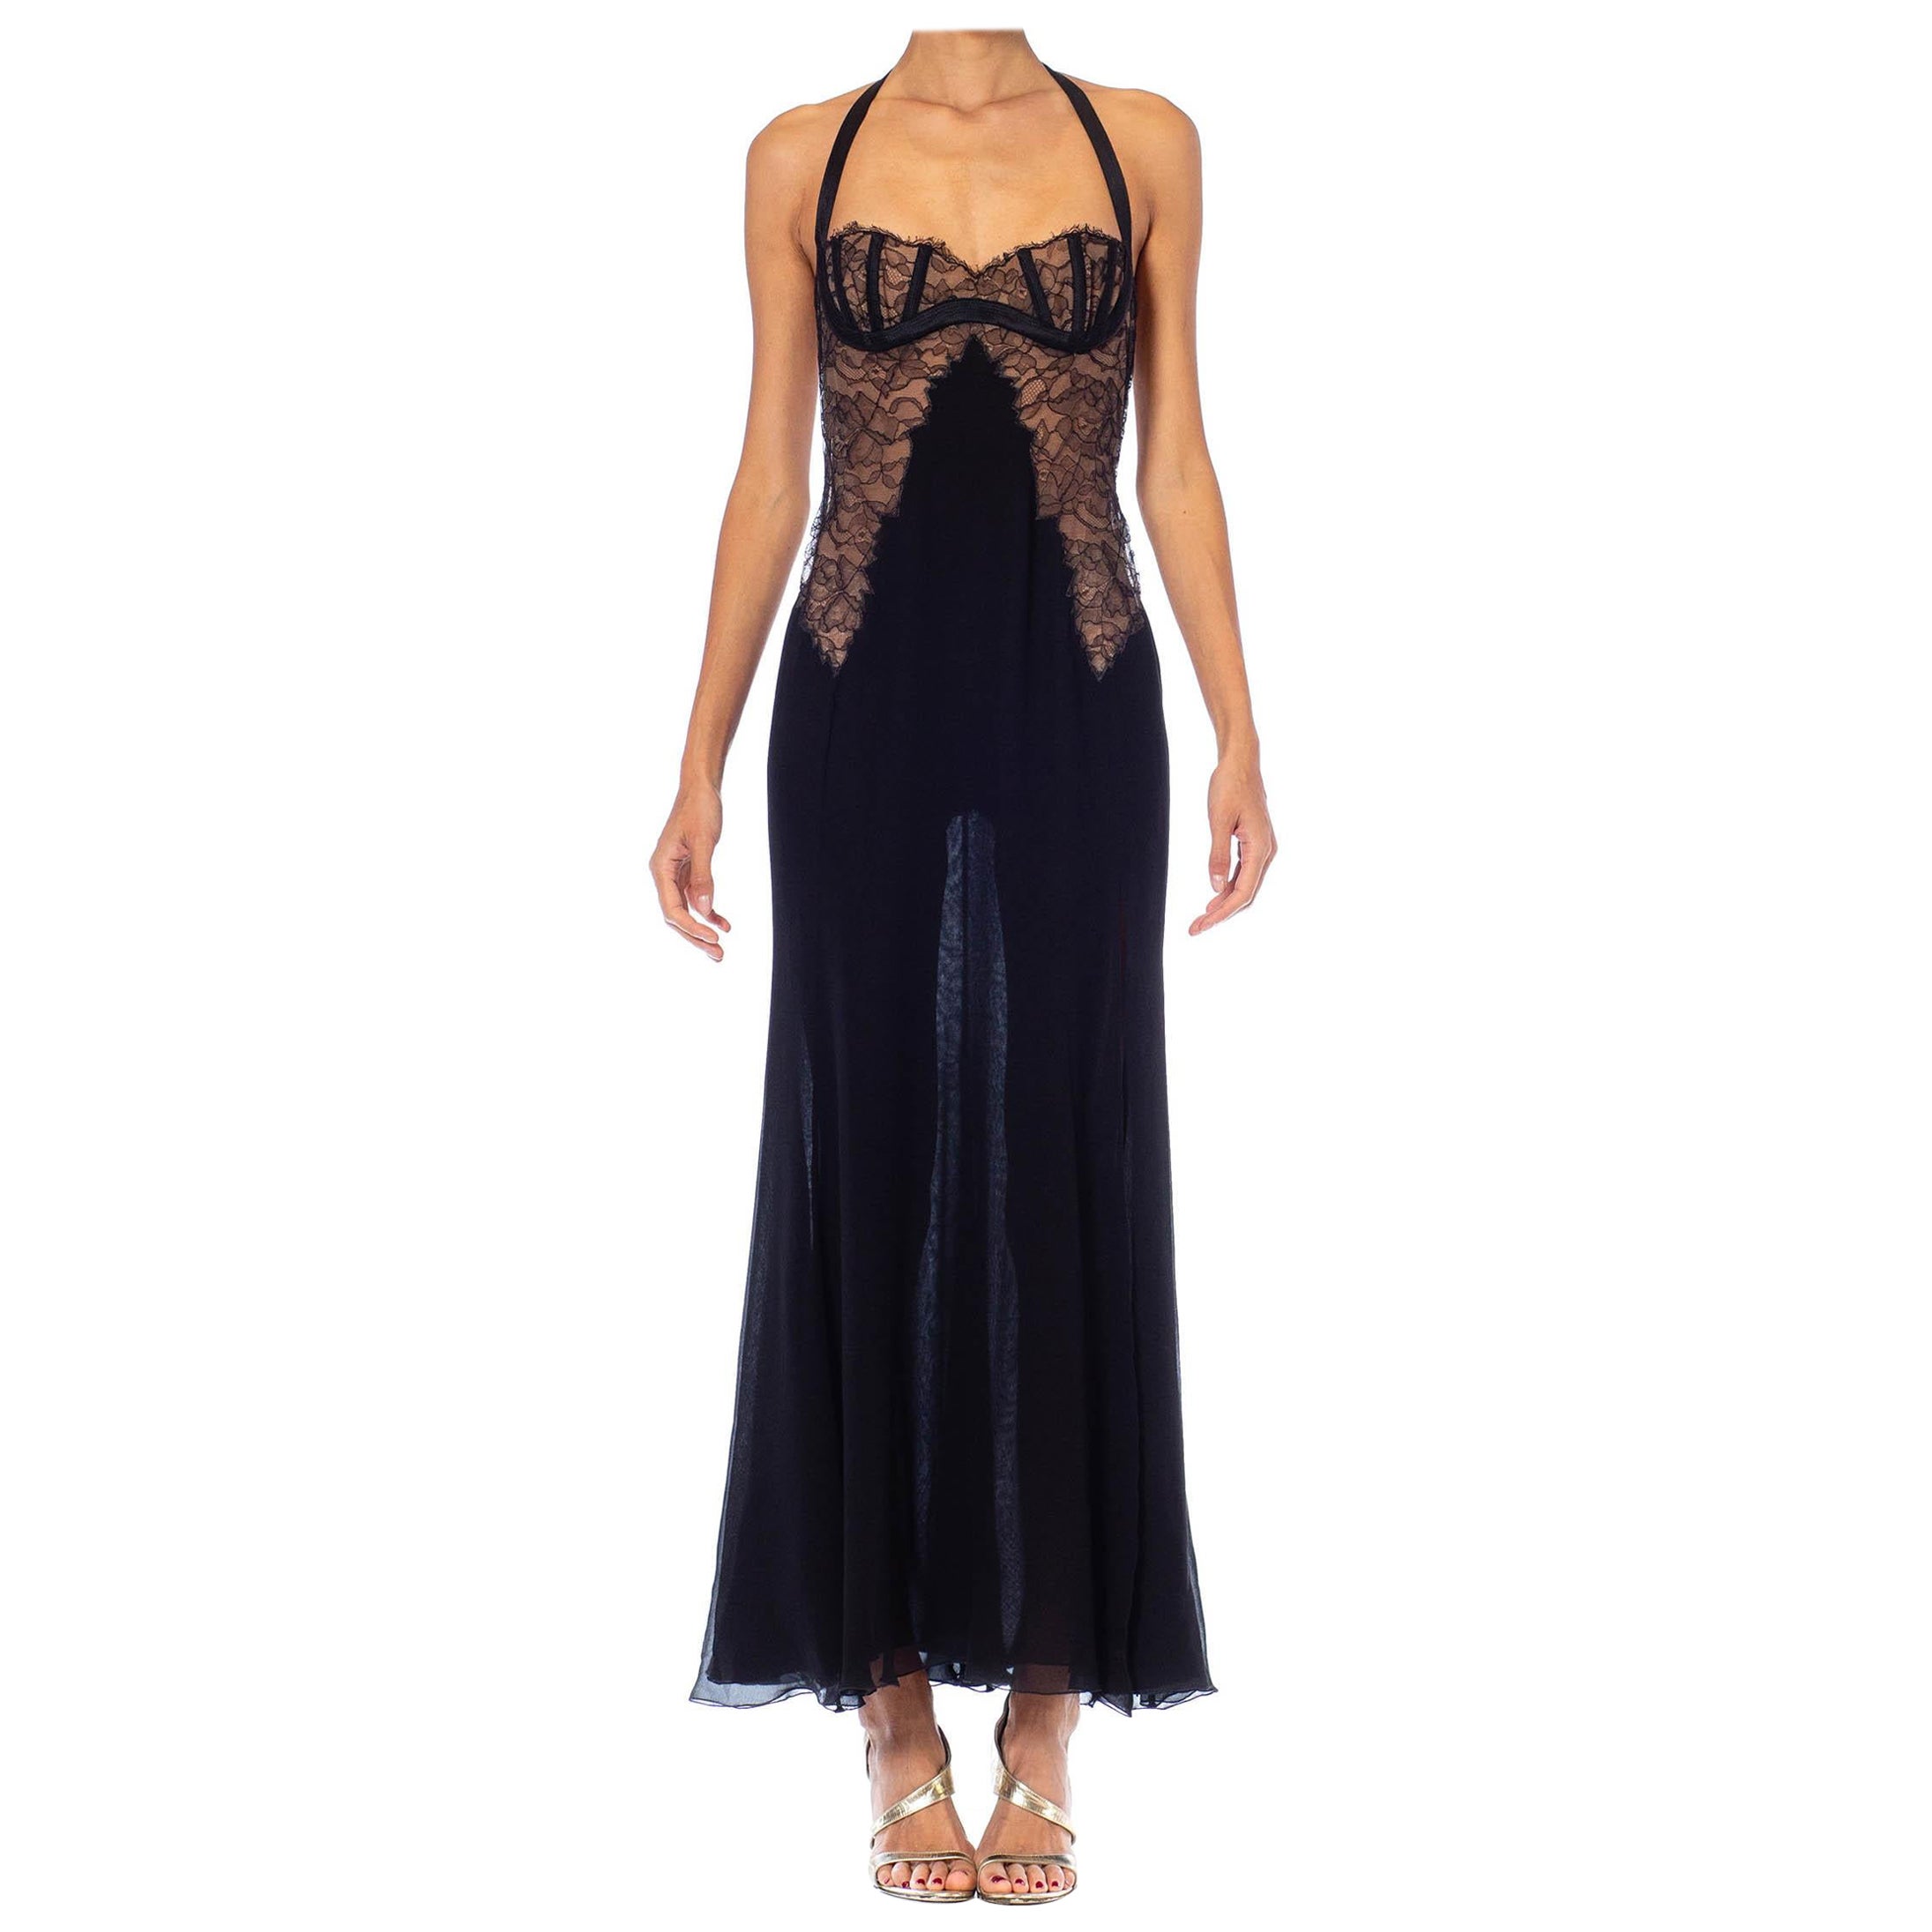 1990S Gianni Versace Black Silk Chiffon & Lace Lingerie Gown With High Slit